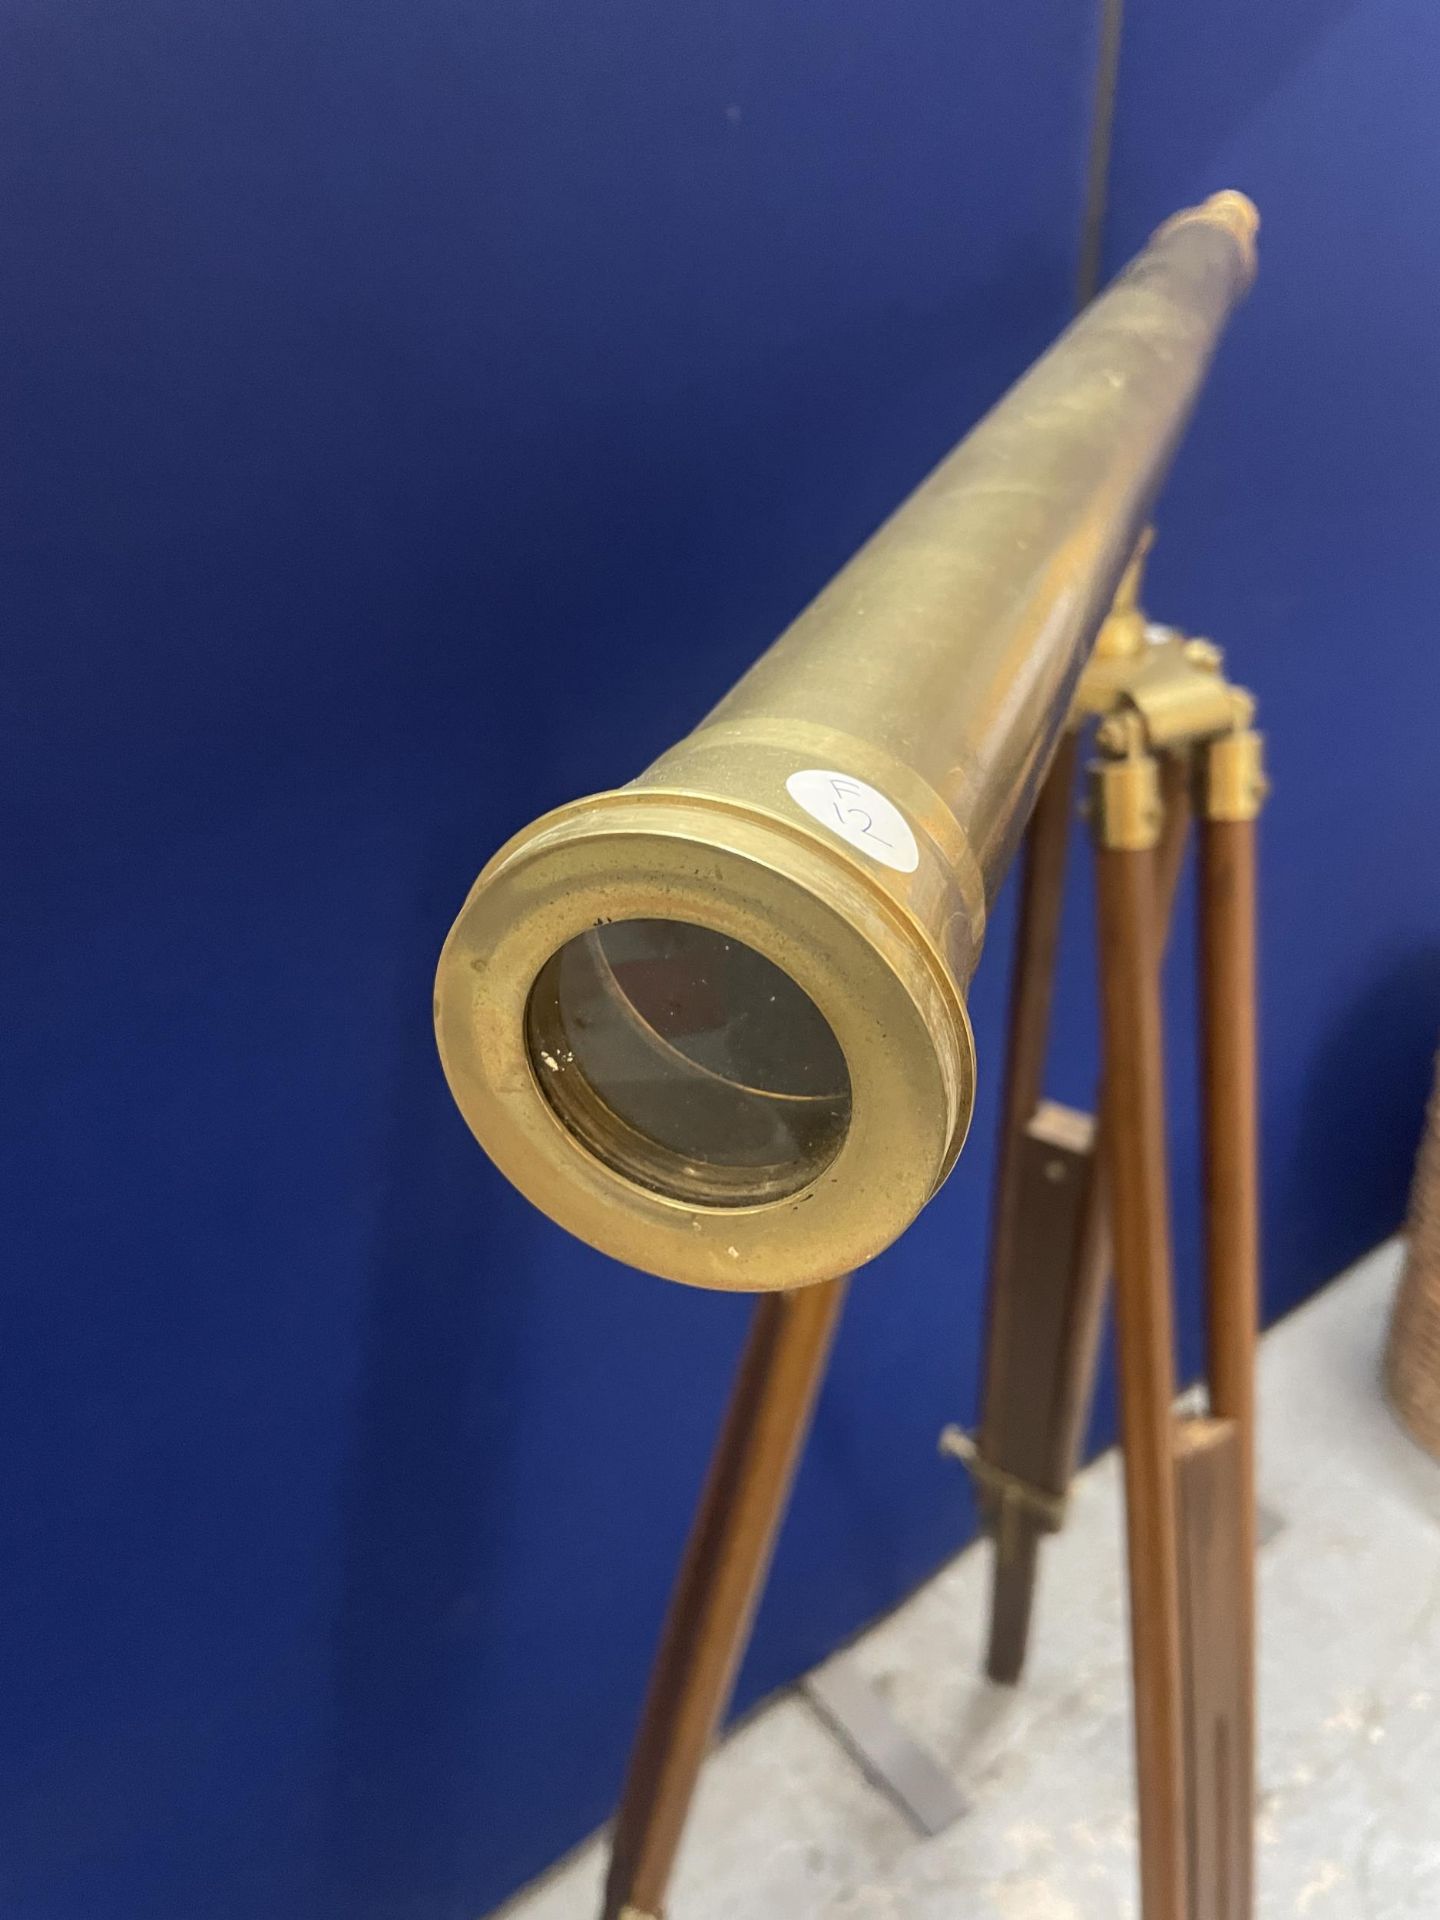 A BRASS TELESCOPE ON AN ADJUSTABLE TRIPOD STAND - Image 3 of 4